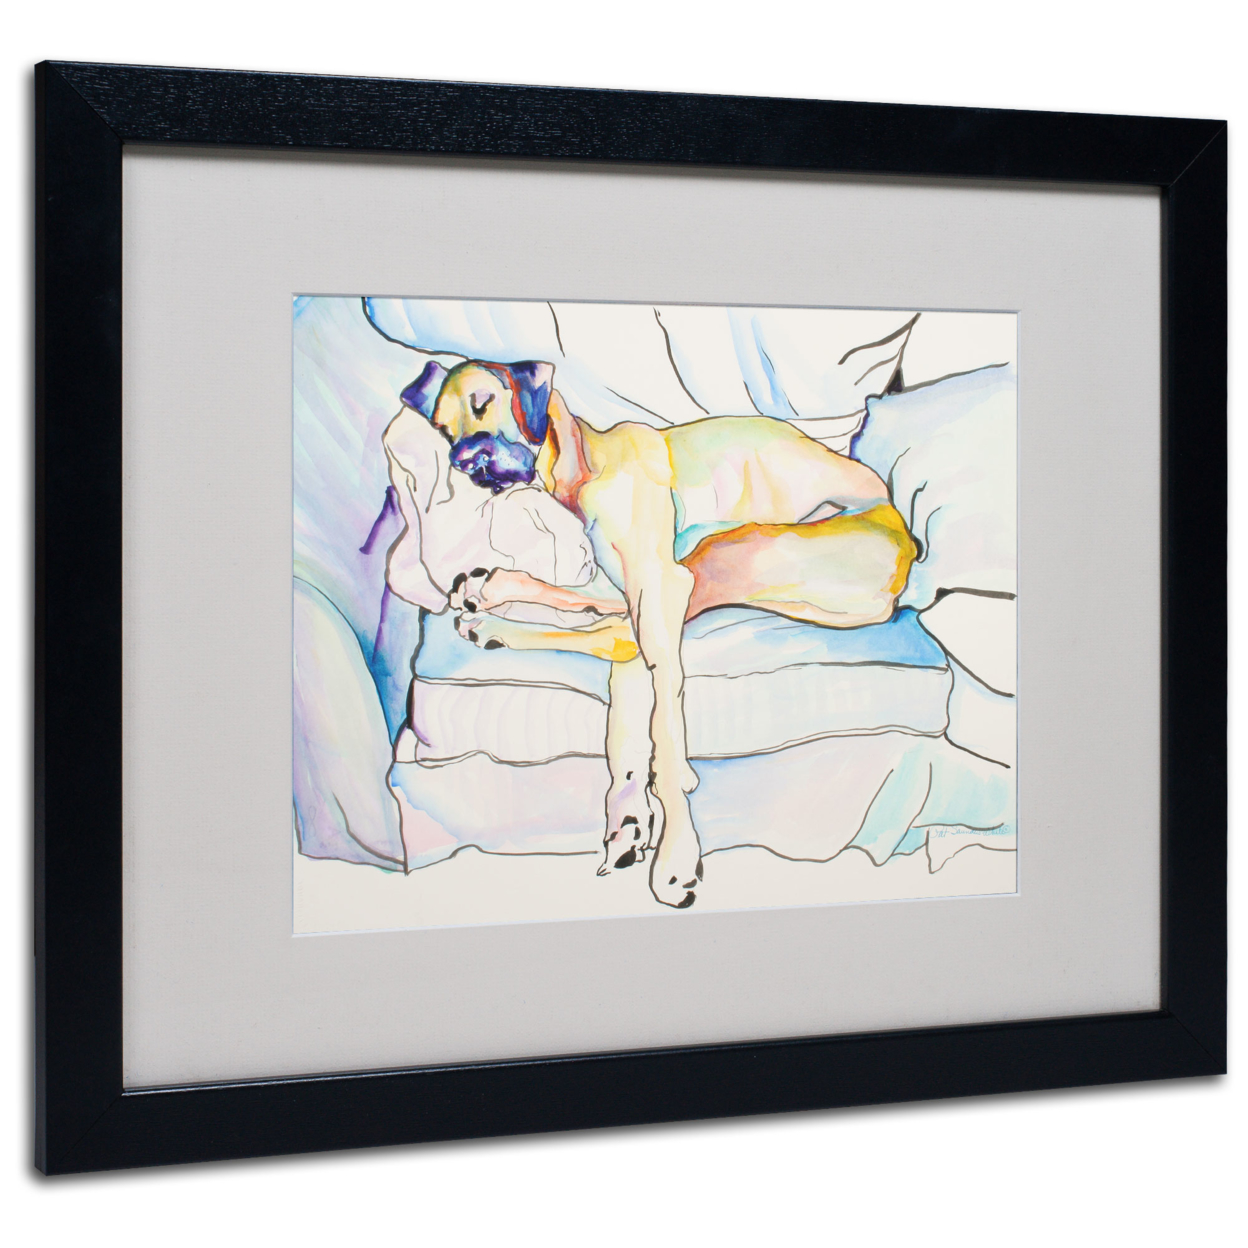 Pat Saunders 'Sleeping Beauty' Black Wooden Framed Art 18 X 22 Inches